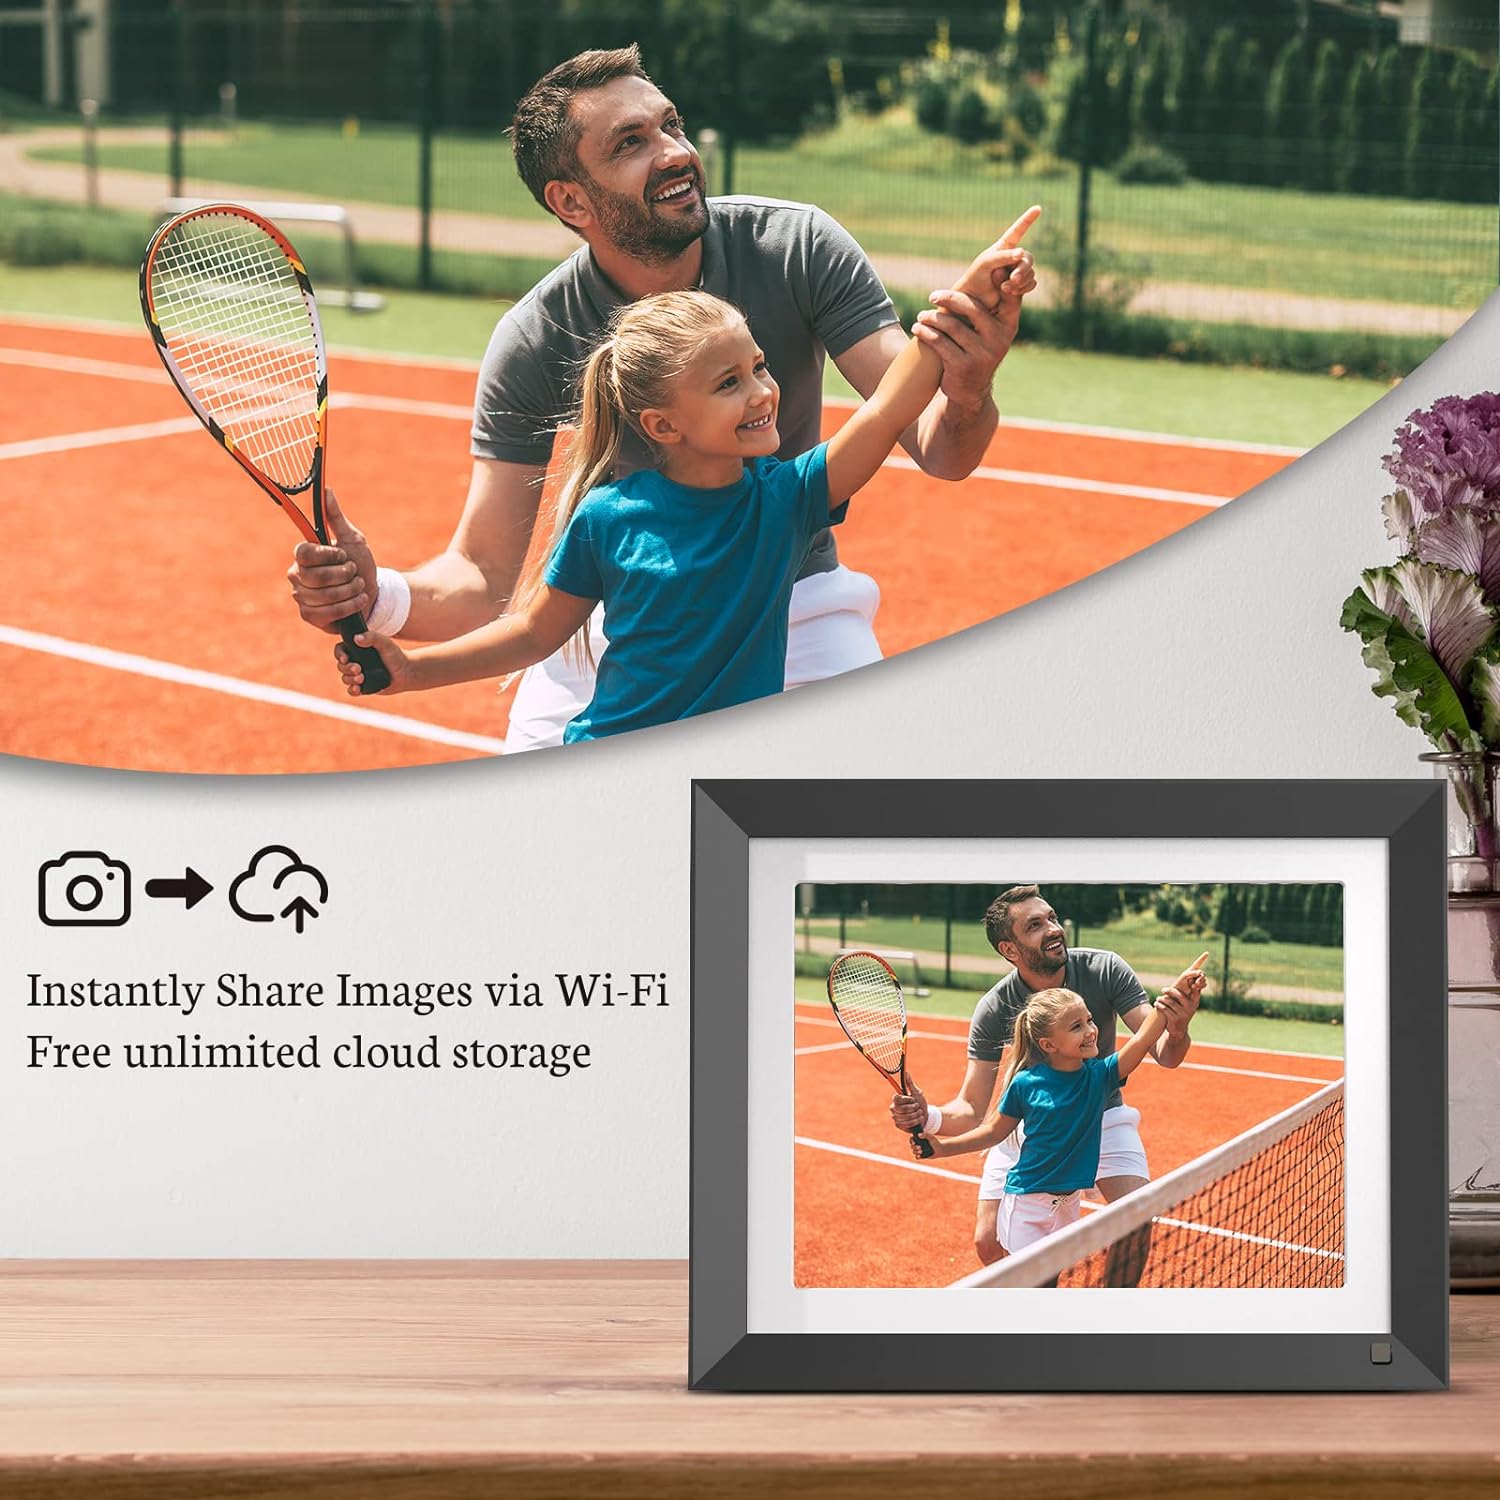 thinkstar 32Gb 2K Wifi Digital Photo Frame 11 Inch, 2176X1600 Ultra-Clear Ips Display, Smart Electronic Picture Frame, Easy To Share…